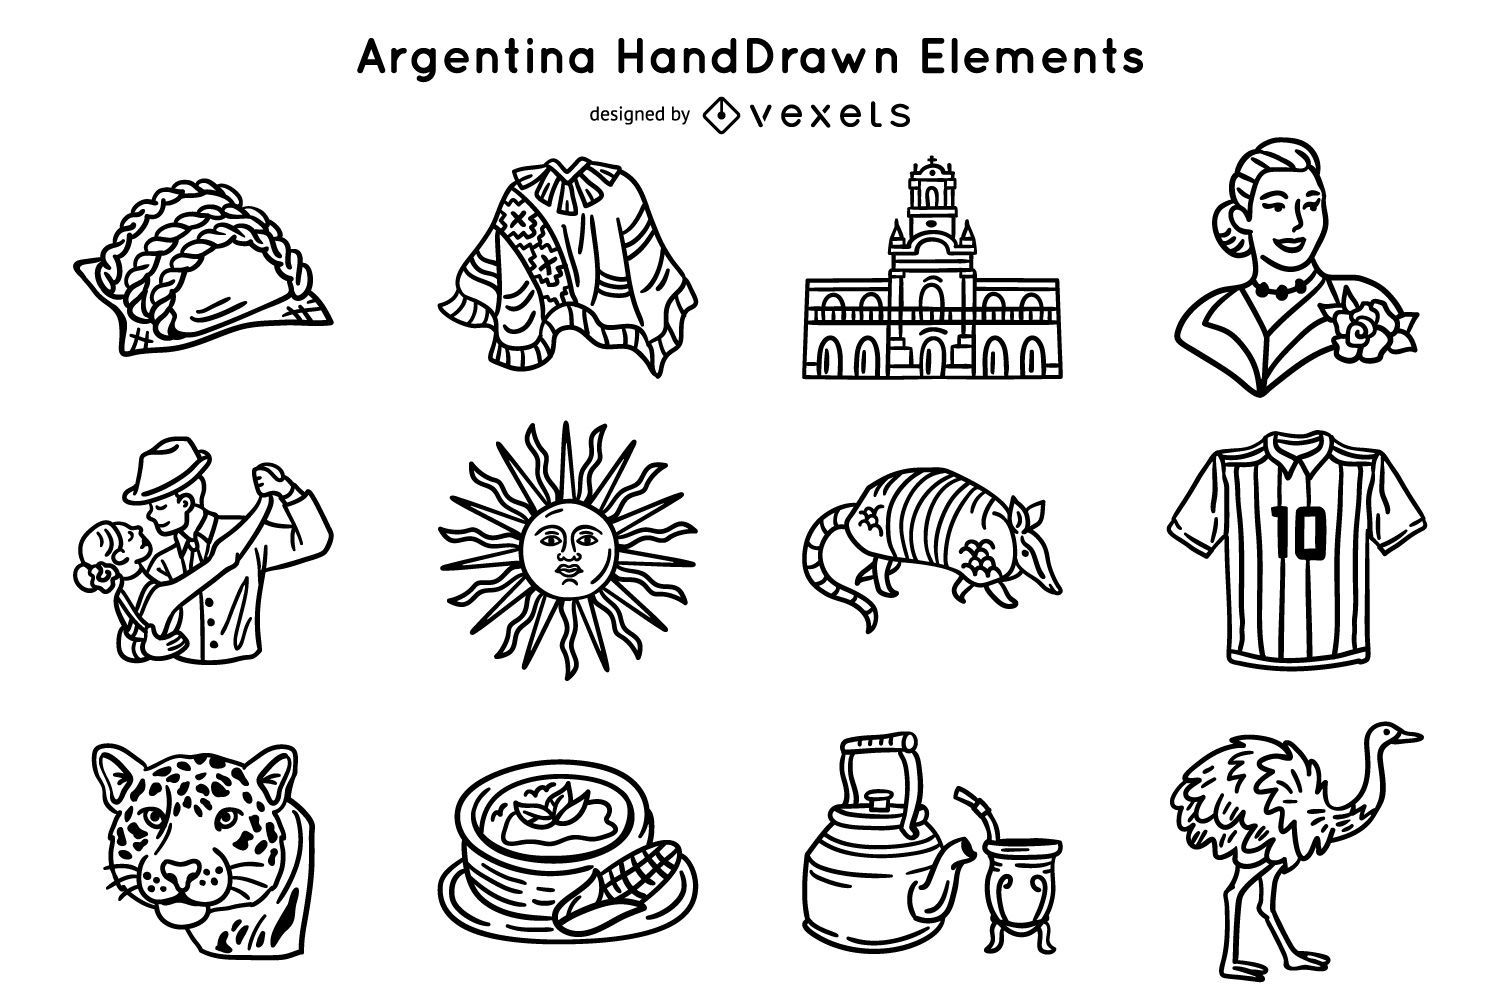 Hand drawn argentina stroke elements pack